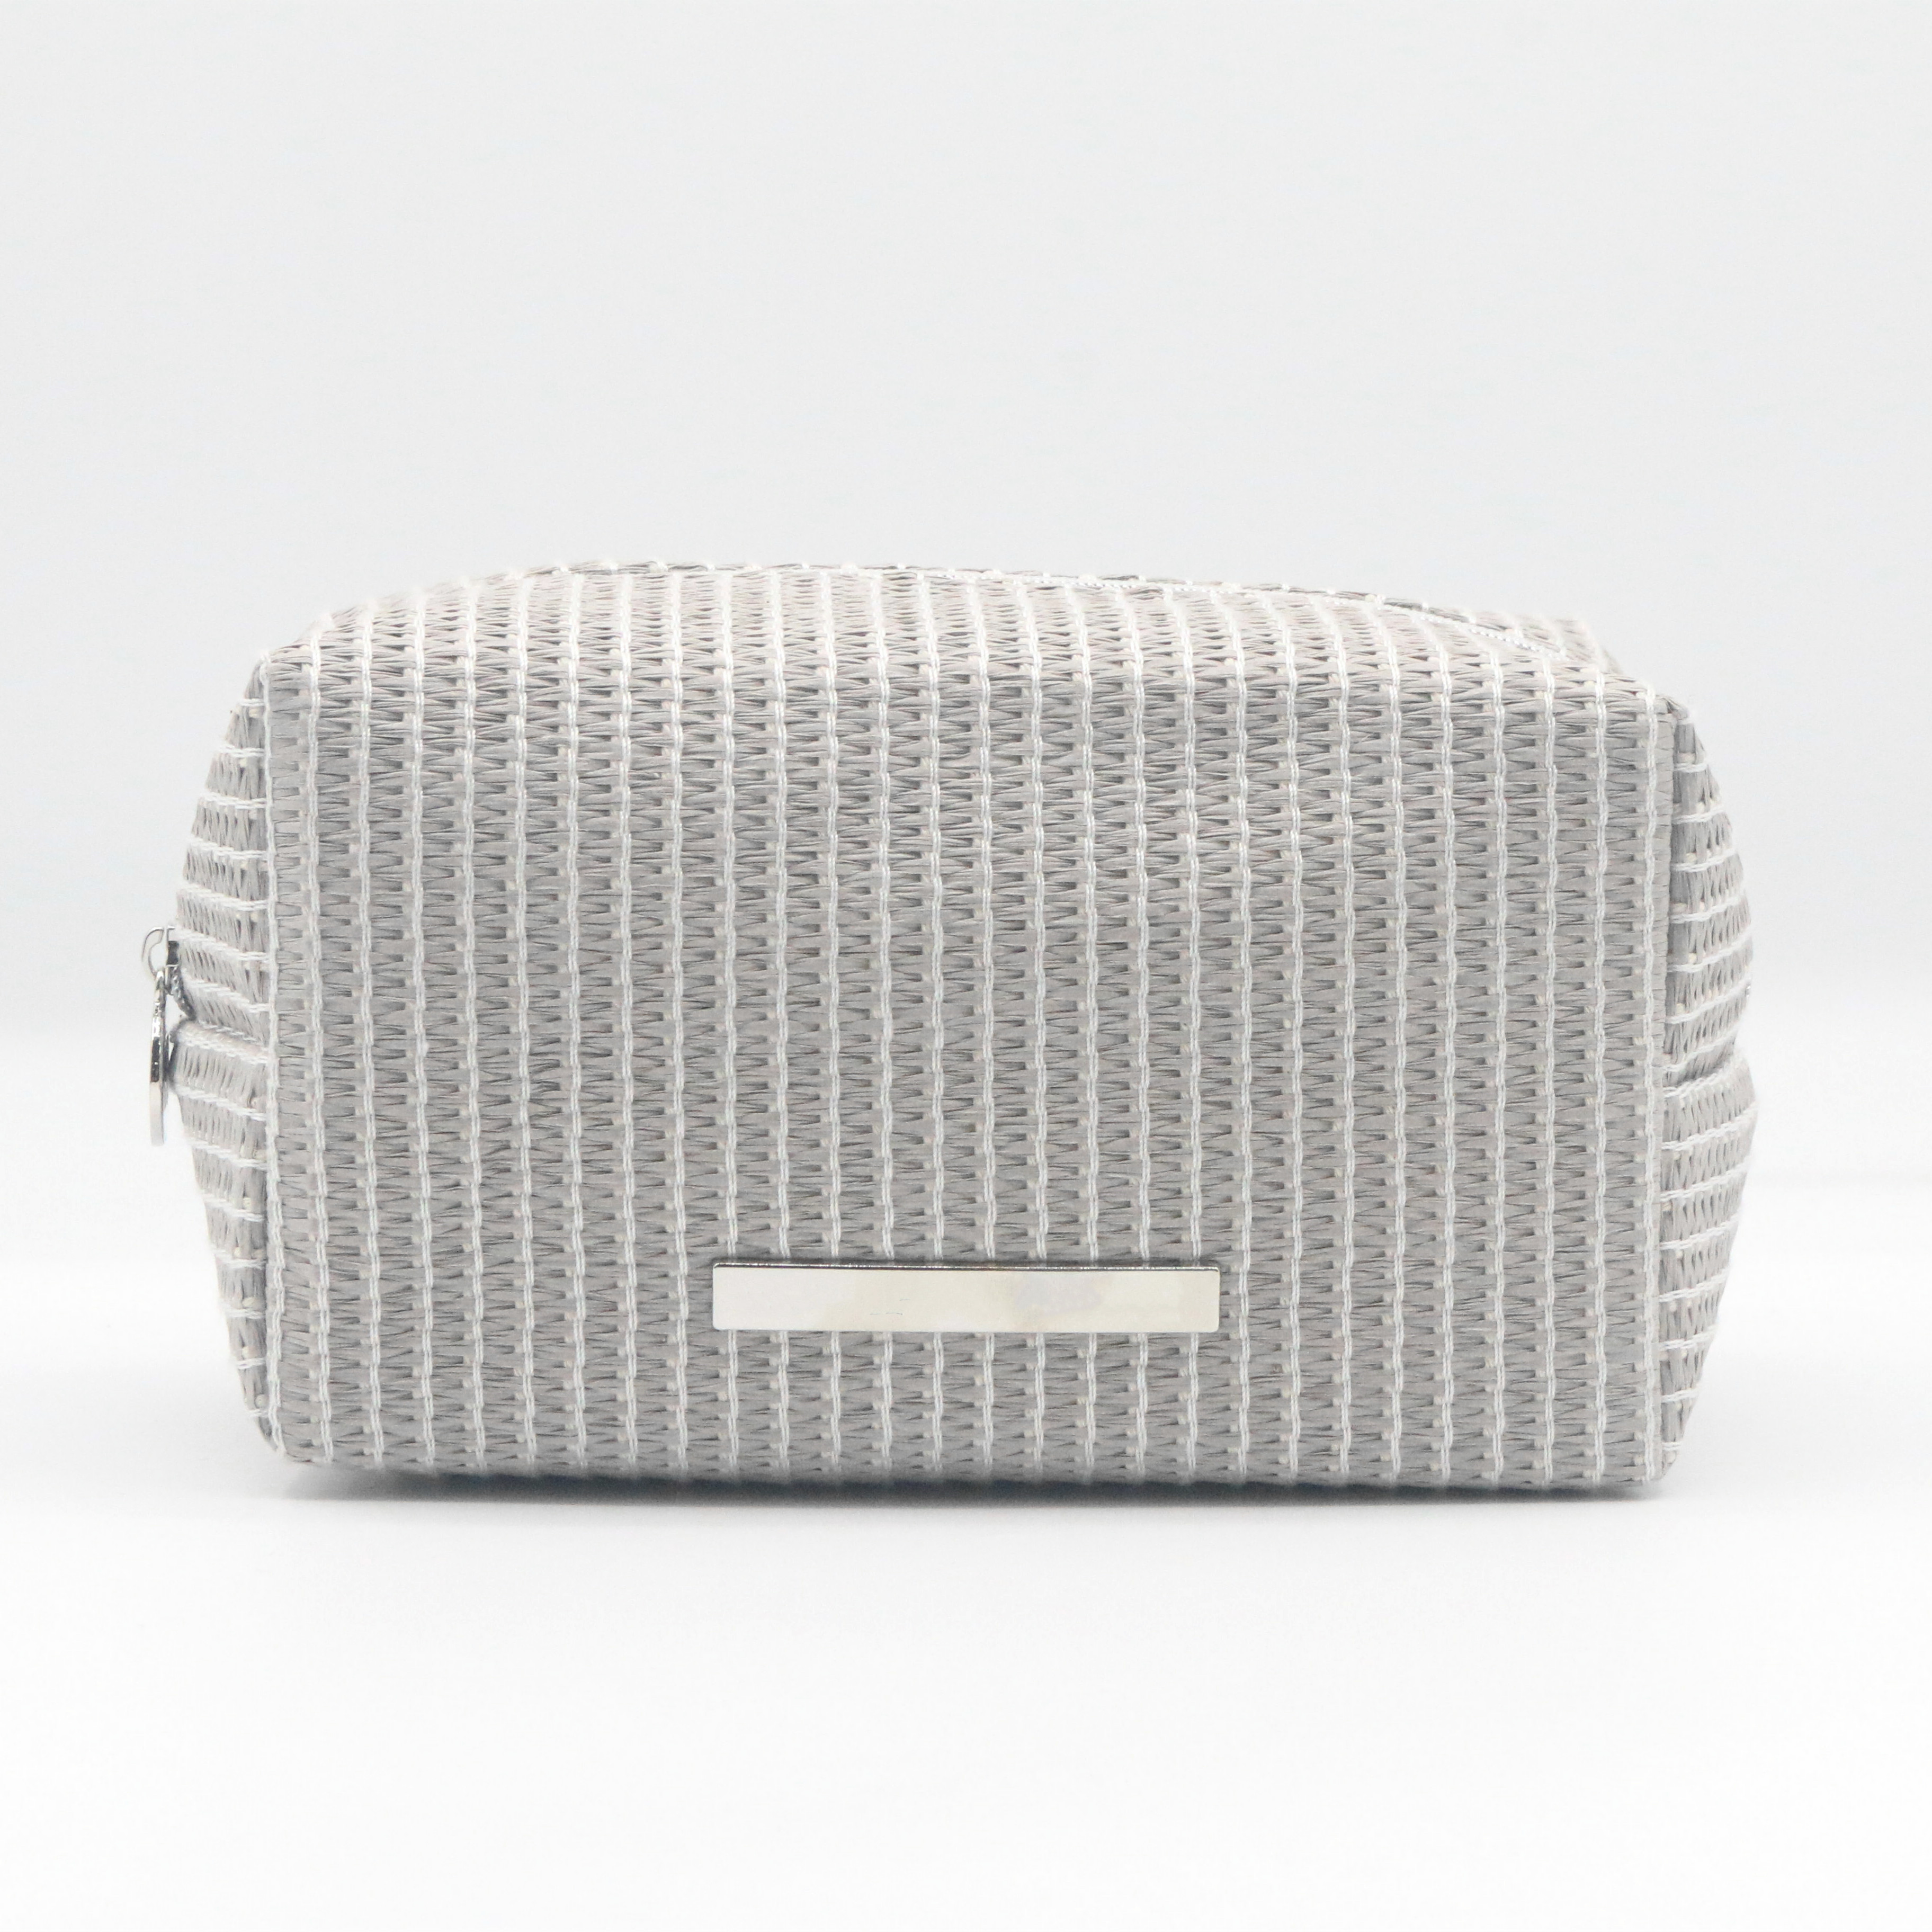 Sustainable Natural Straw Cosmetic Bag Classic Square Shape Chic Silvery Paper Straw Makeup Pouch Bag